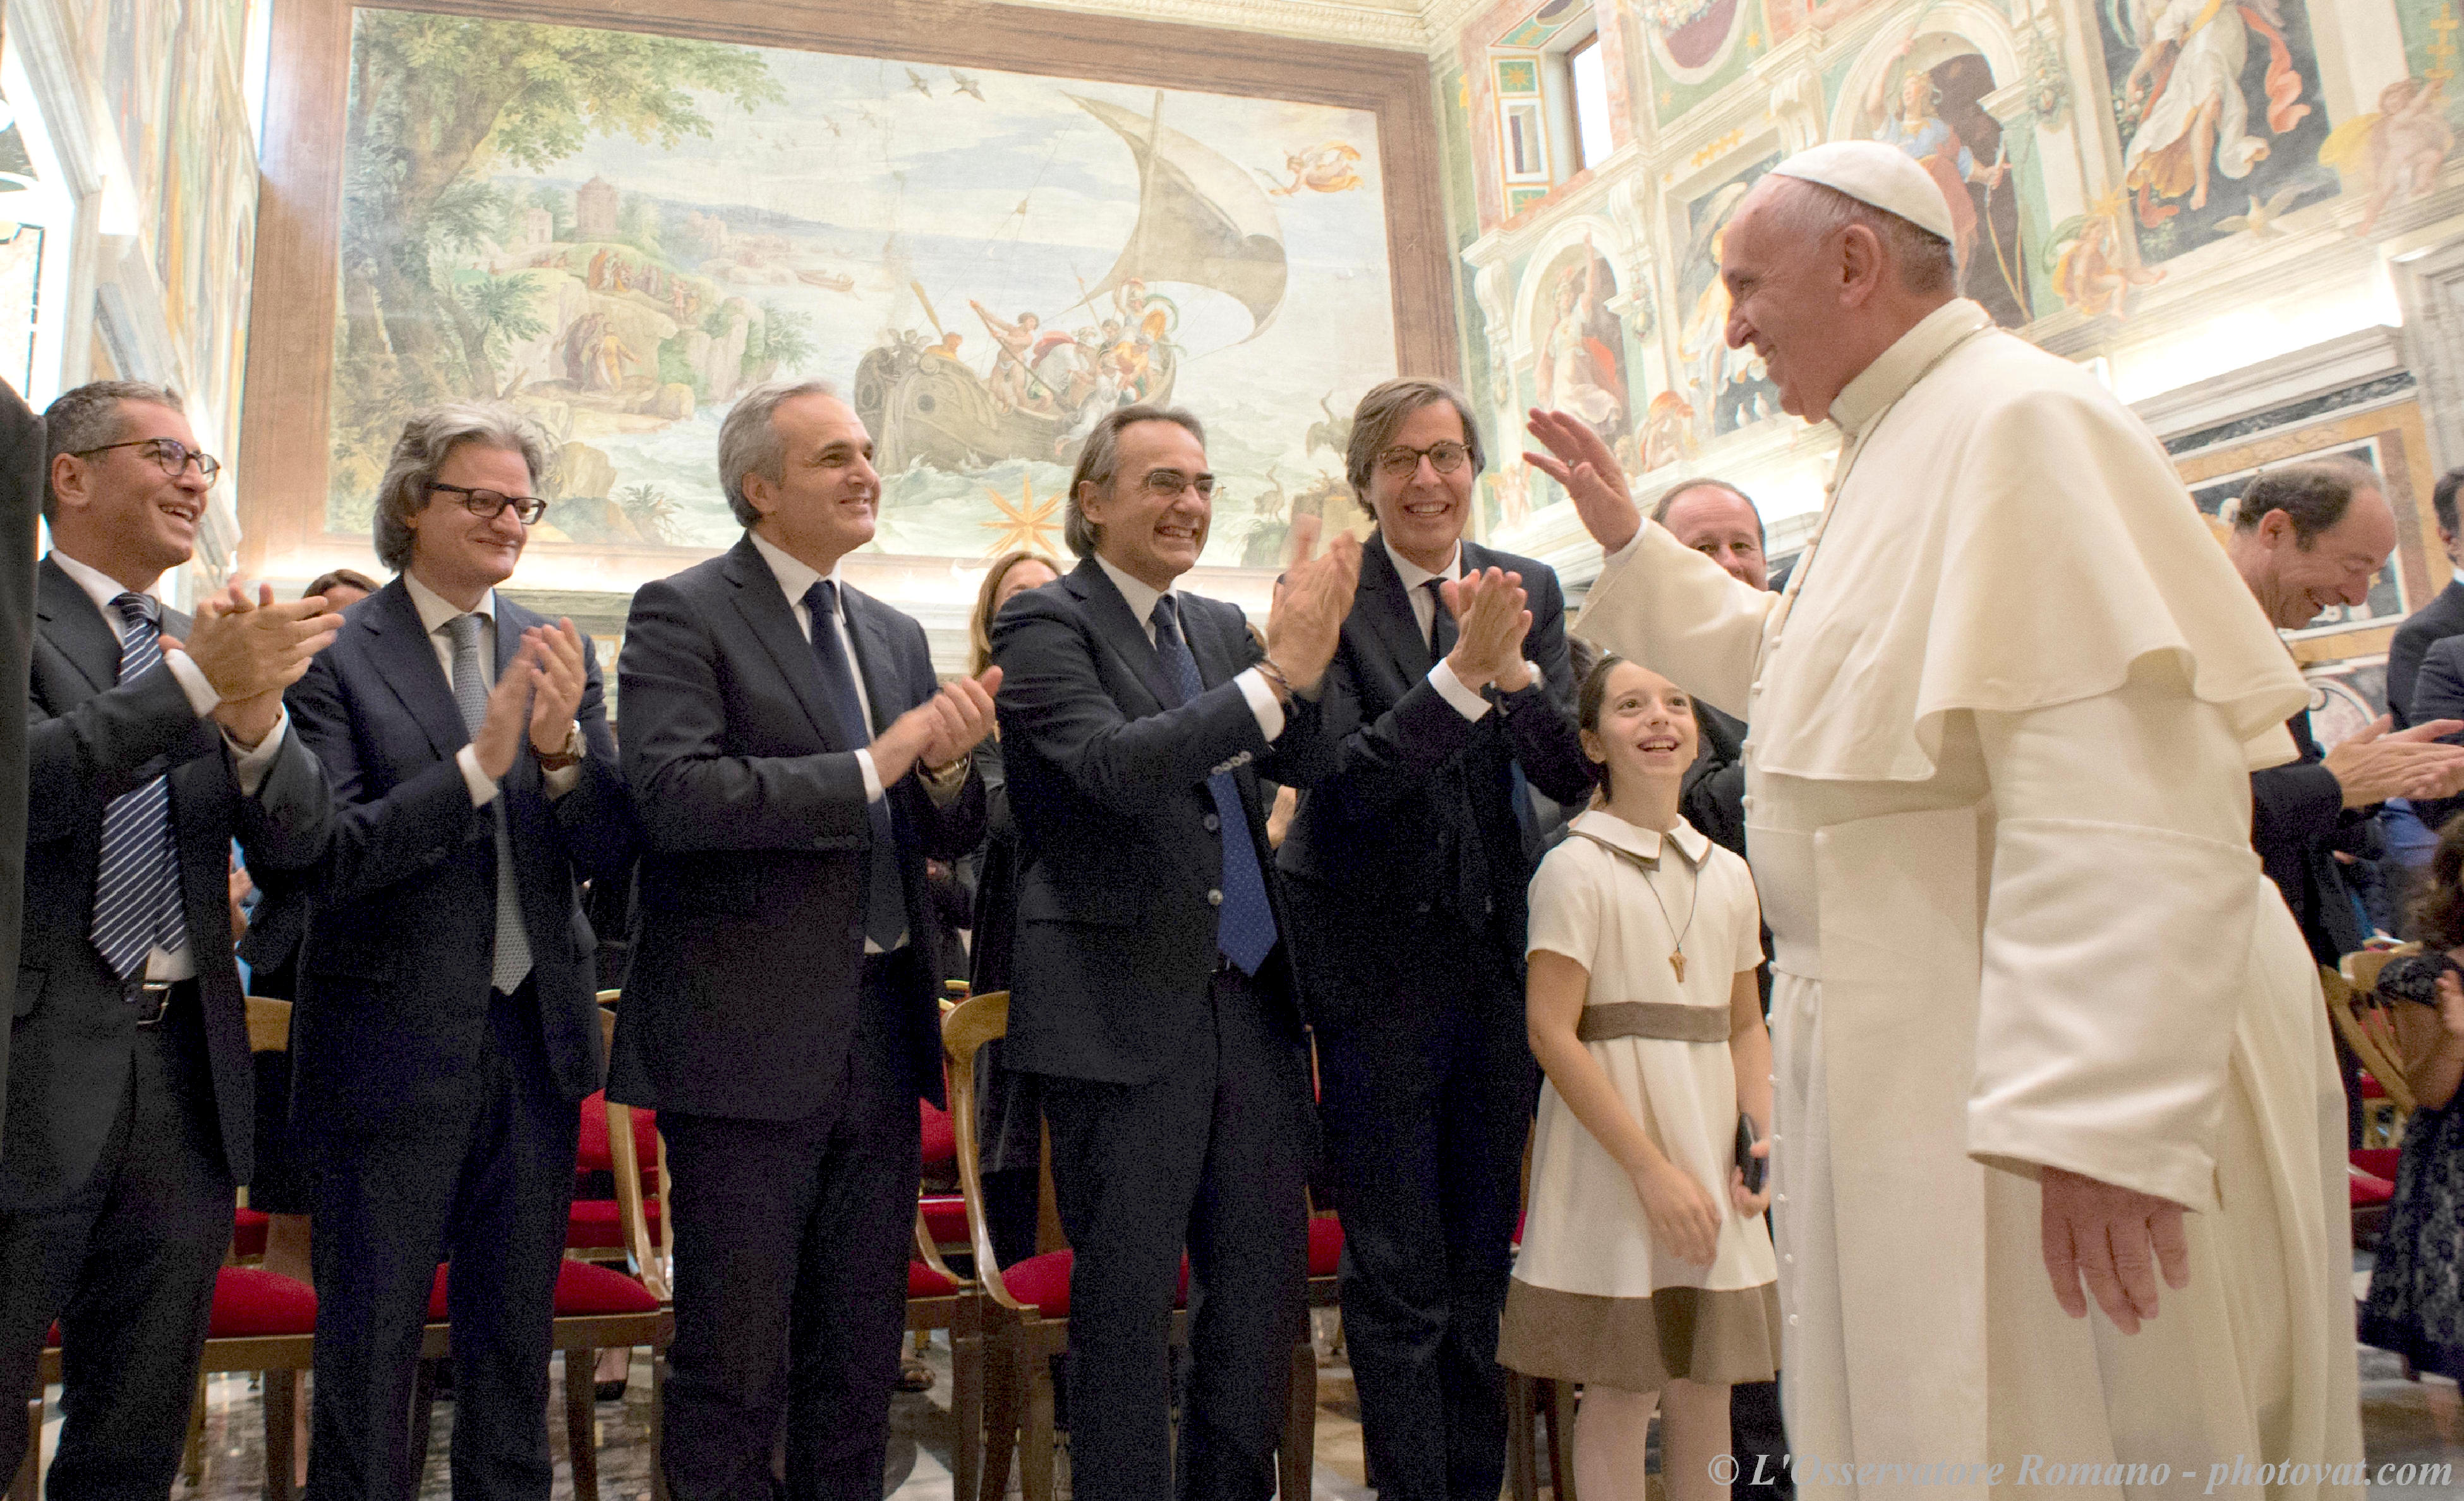 Pope Francis meeting the Italian Superior Council of the Magistracy (CSM)